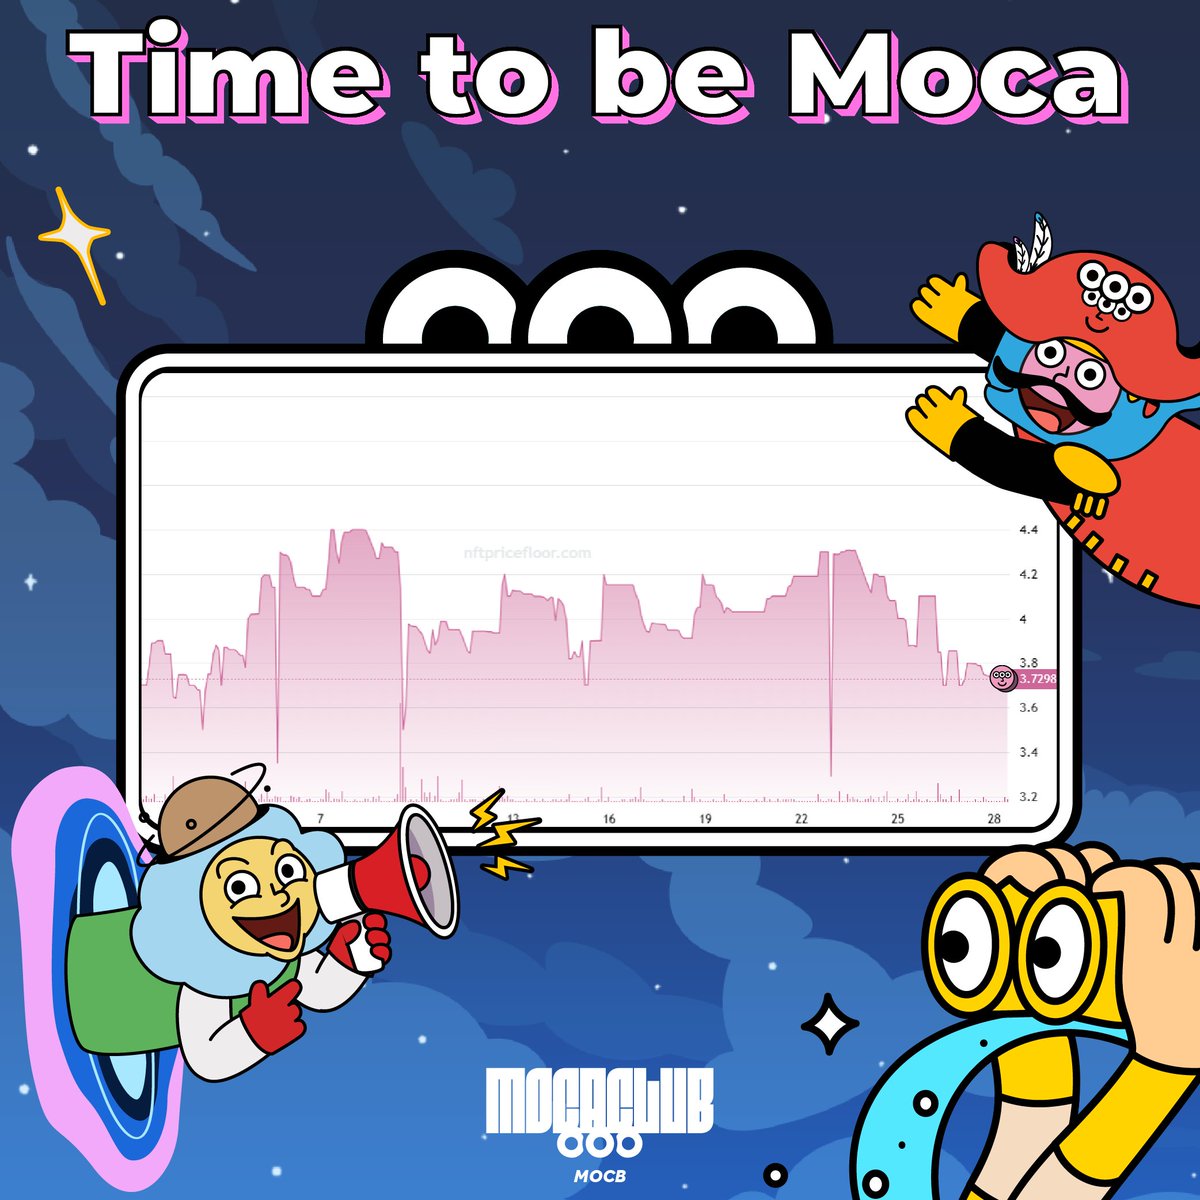 Is the Right Time! for all NFT &Coin lovers! Still early! 
Moca is rising ✨✨✨
#MocaFam #Mocalized $MOCA